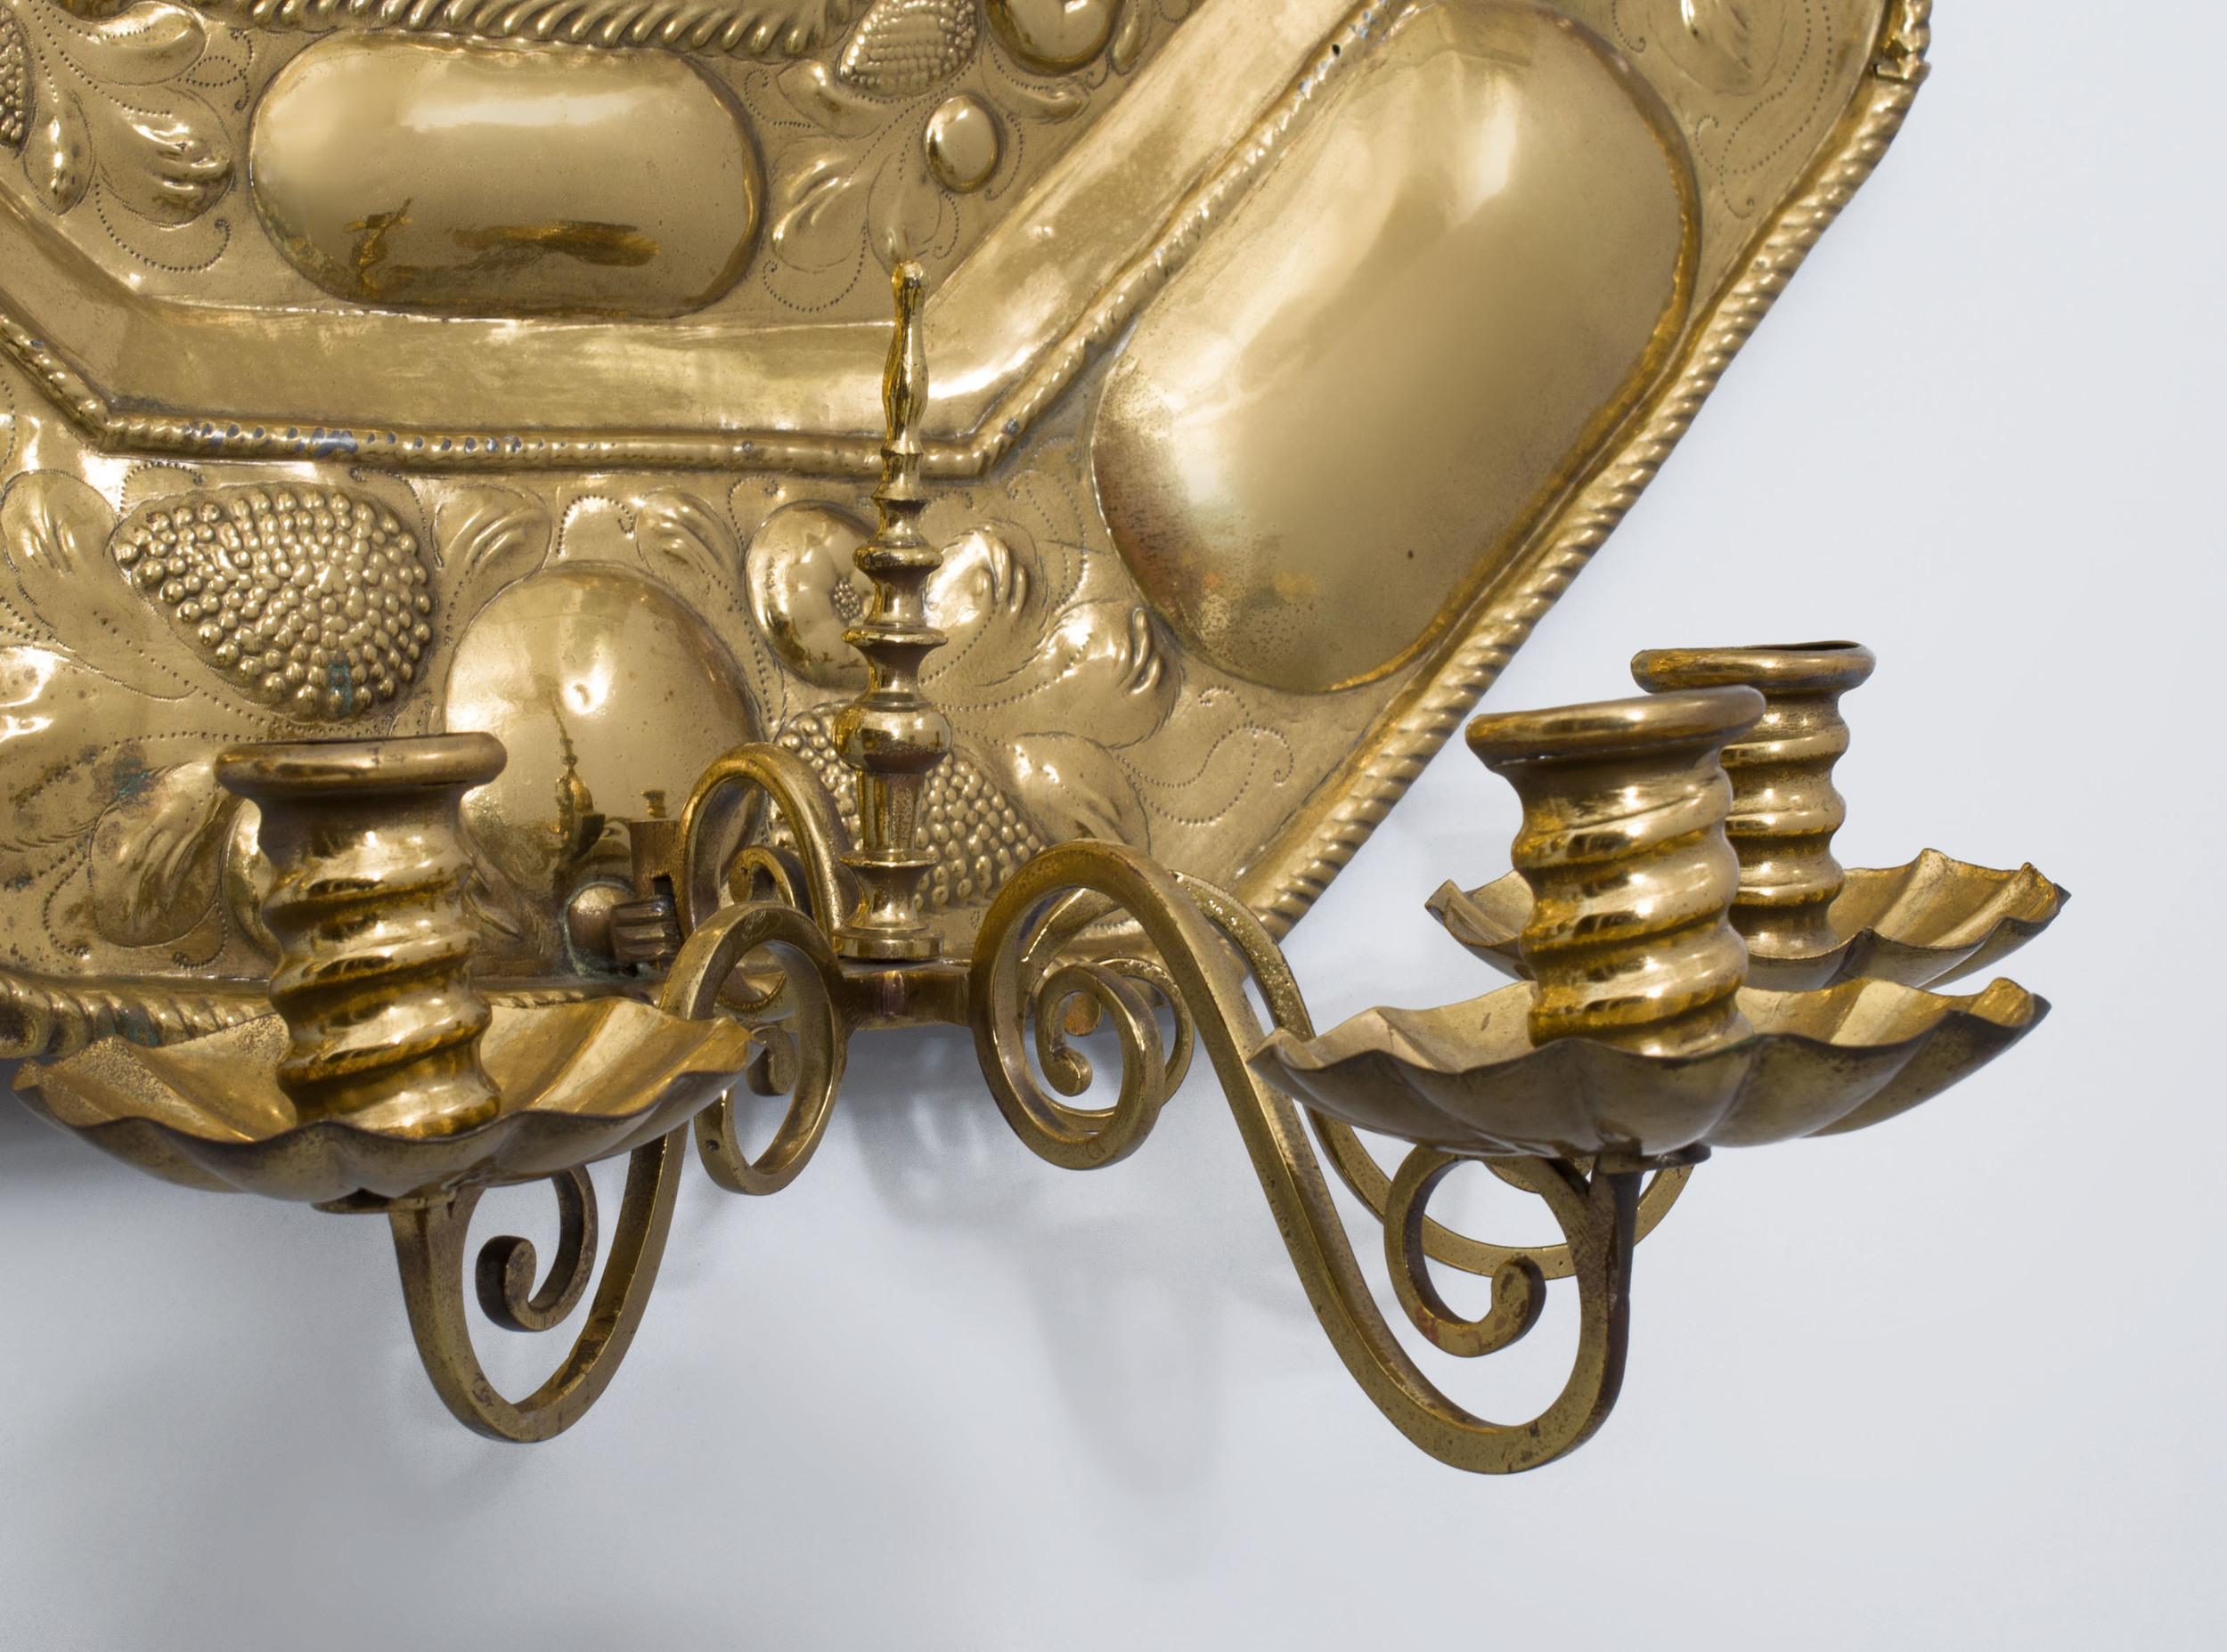 Close pair of Dutch baroque style three-light sconces with brass repousse backplates, late 18th-early 19th century.